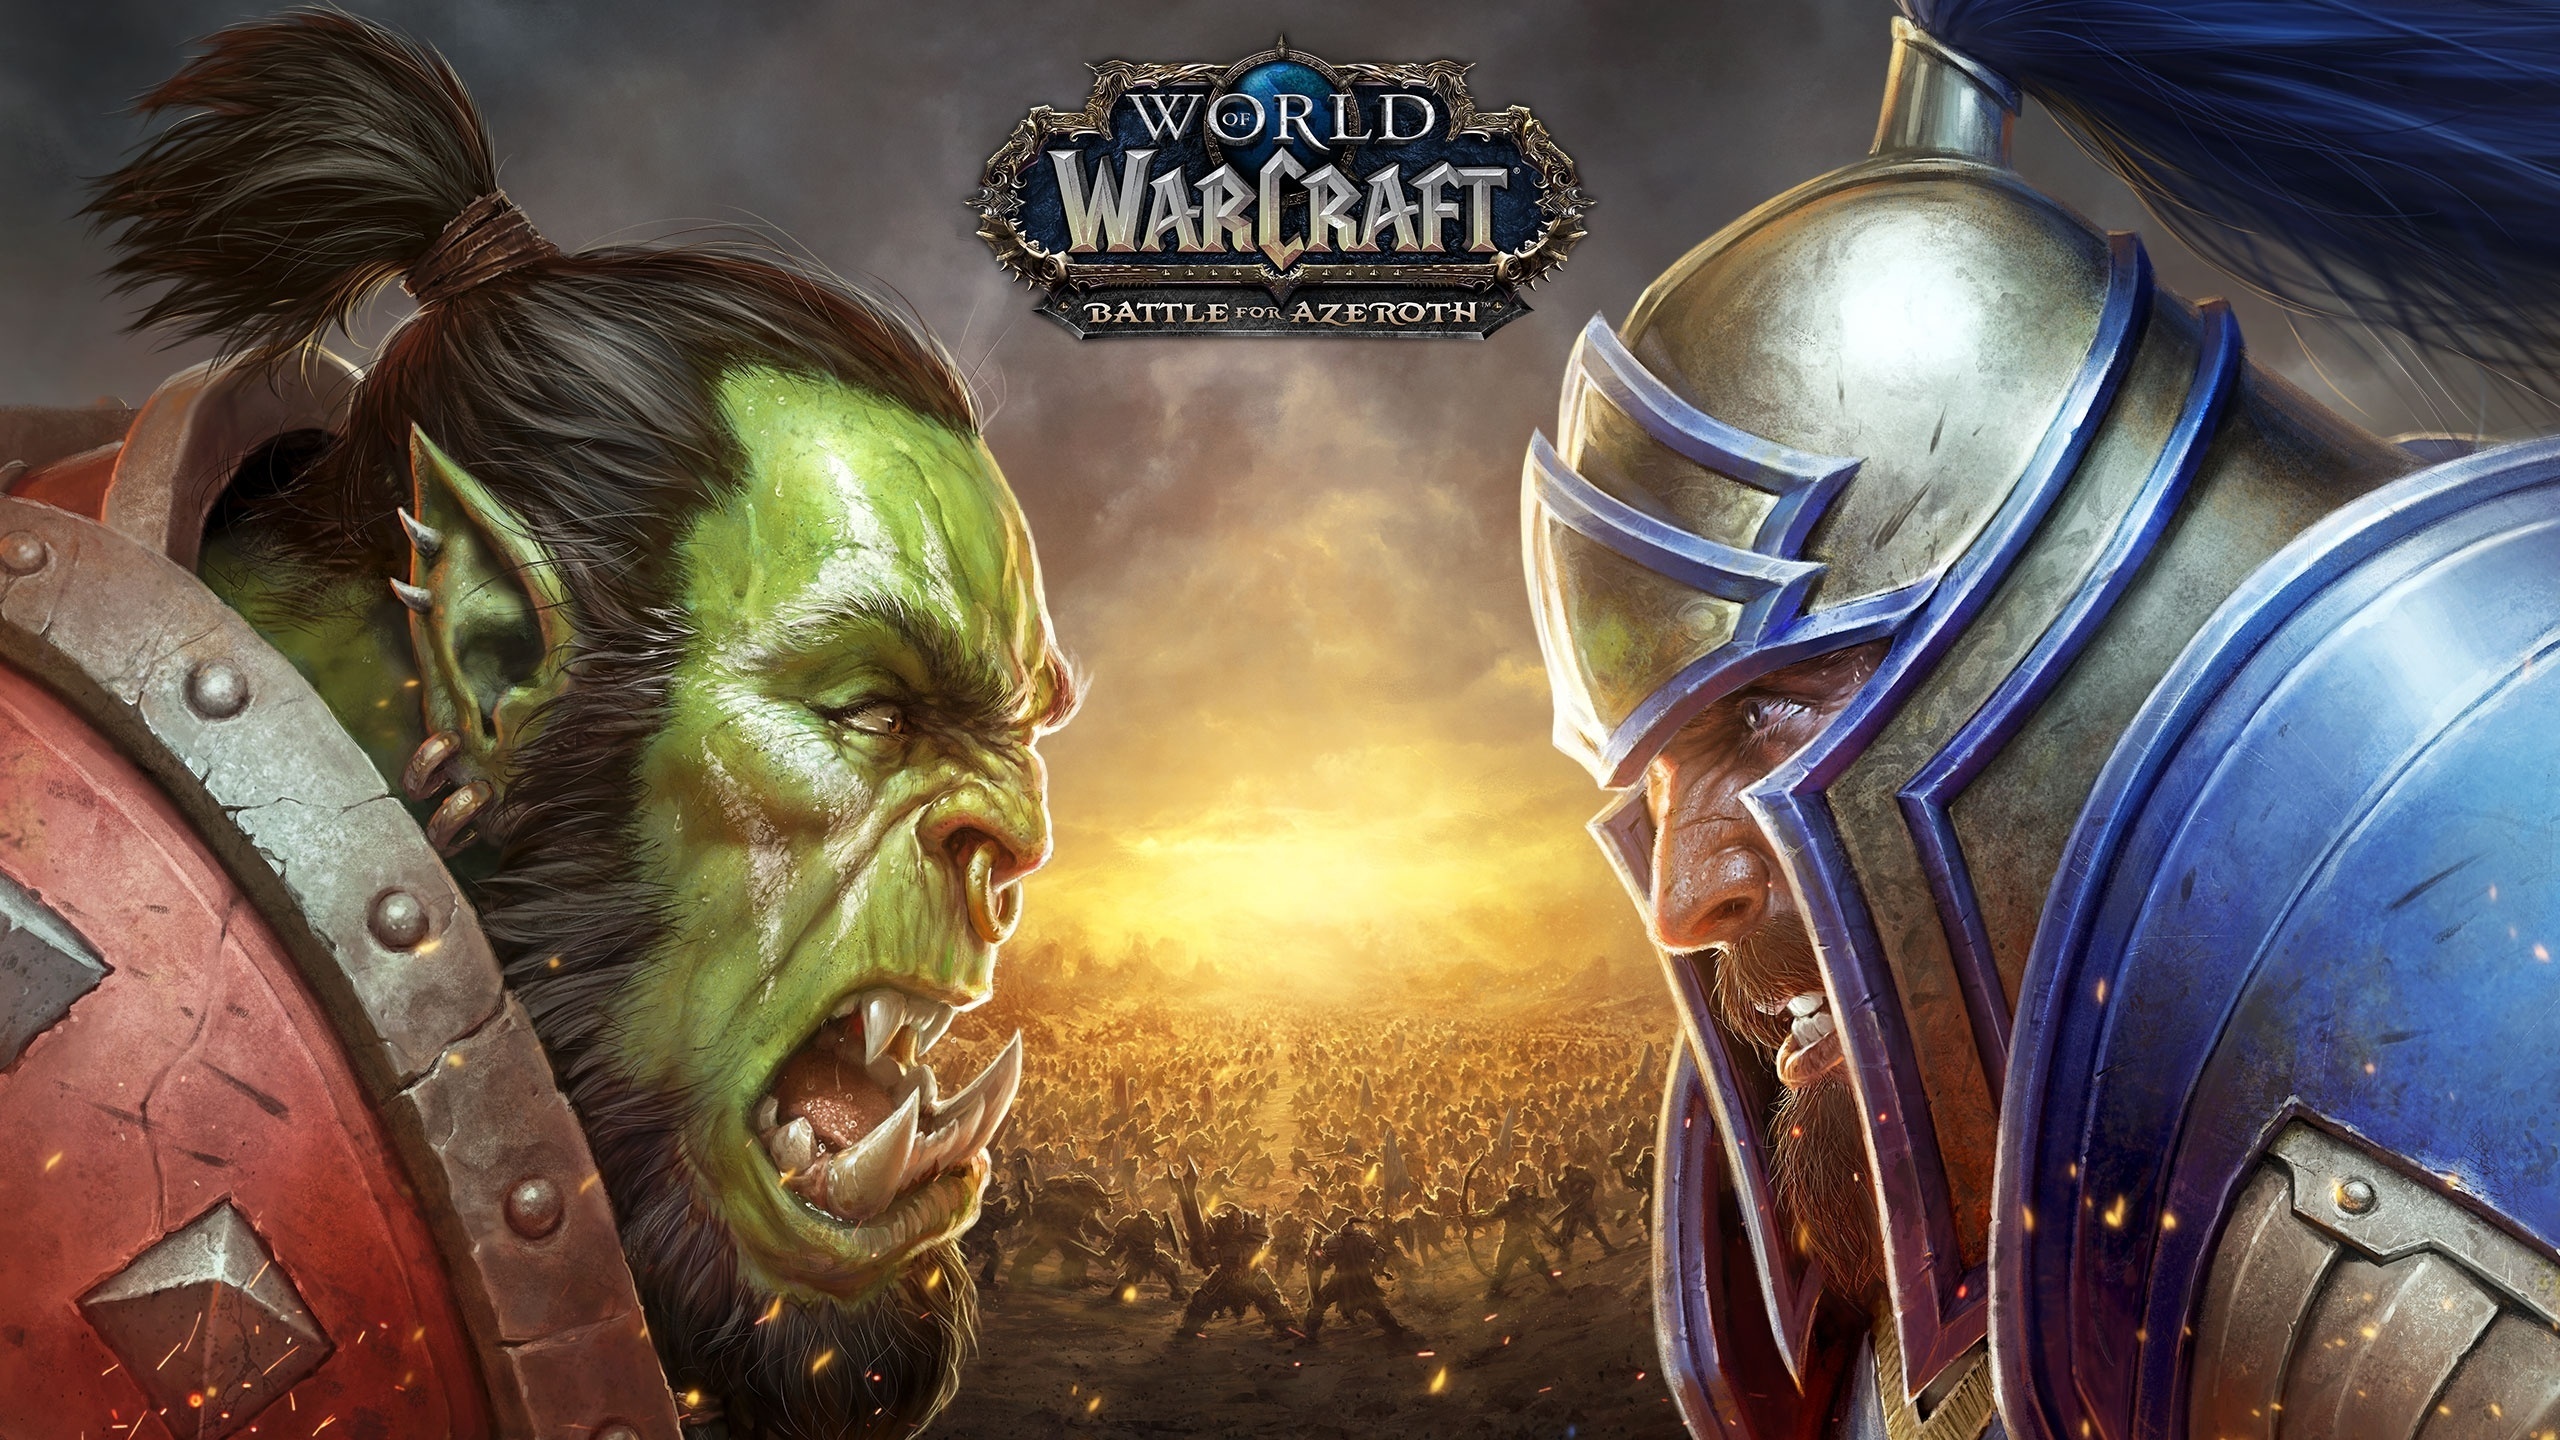 WoW: Battle for Azeroth in review: DX11 vs. DX12 and AMD vs